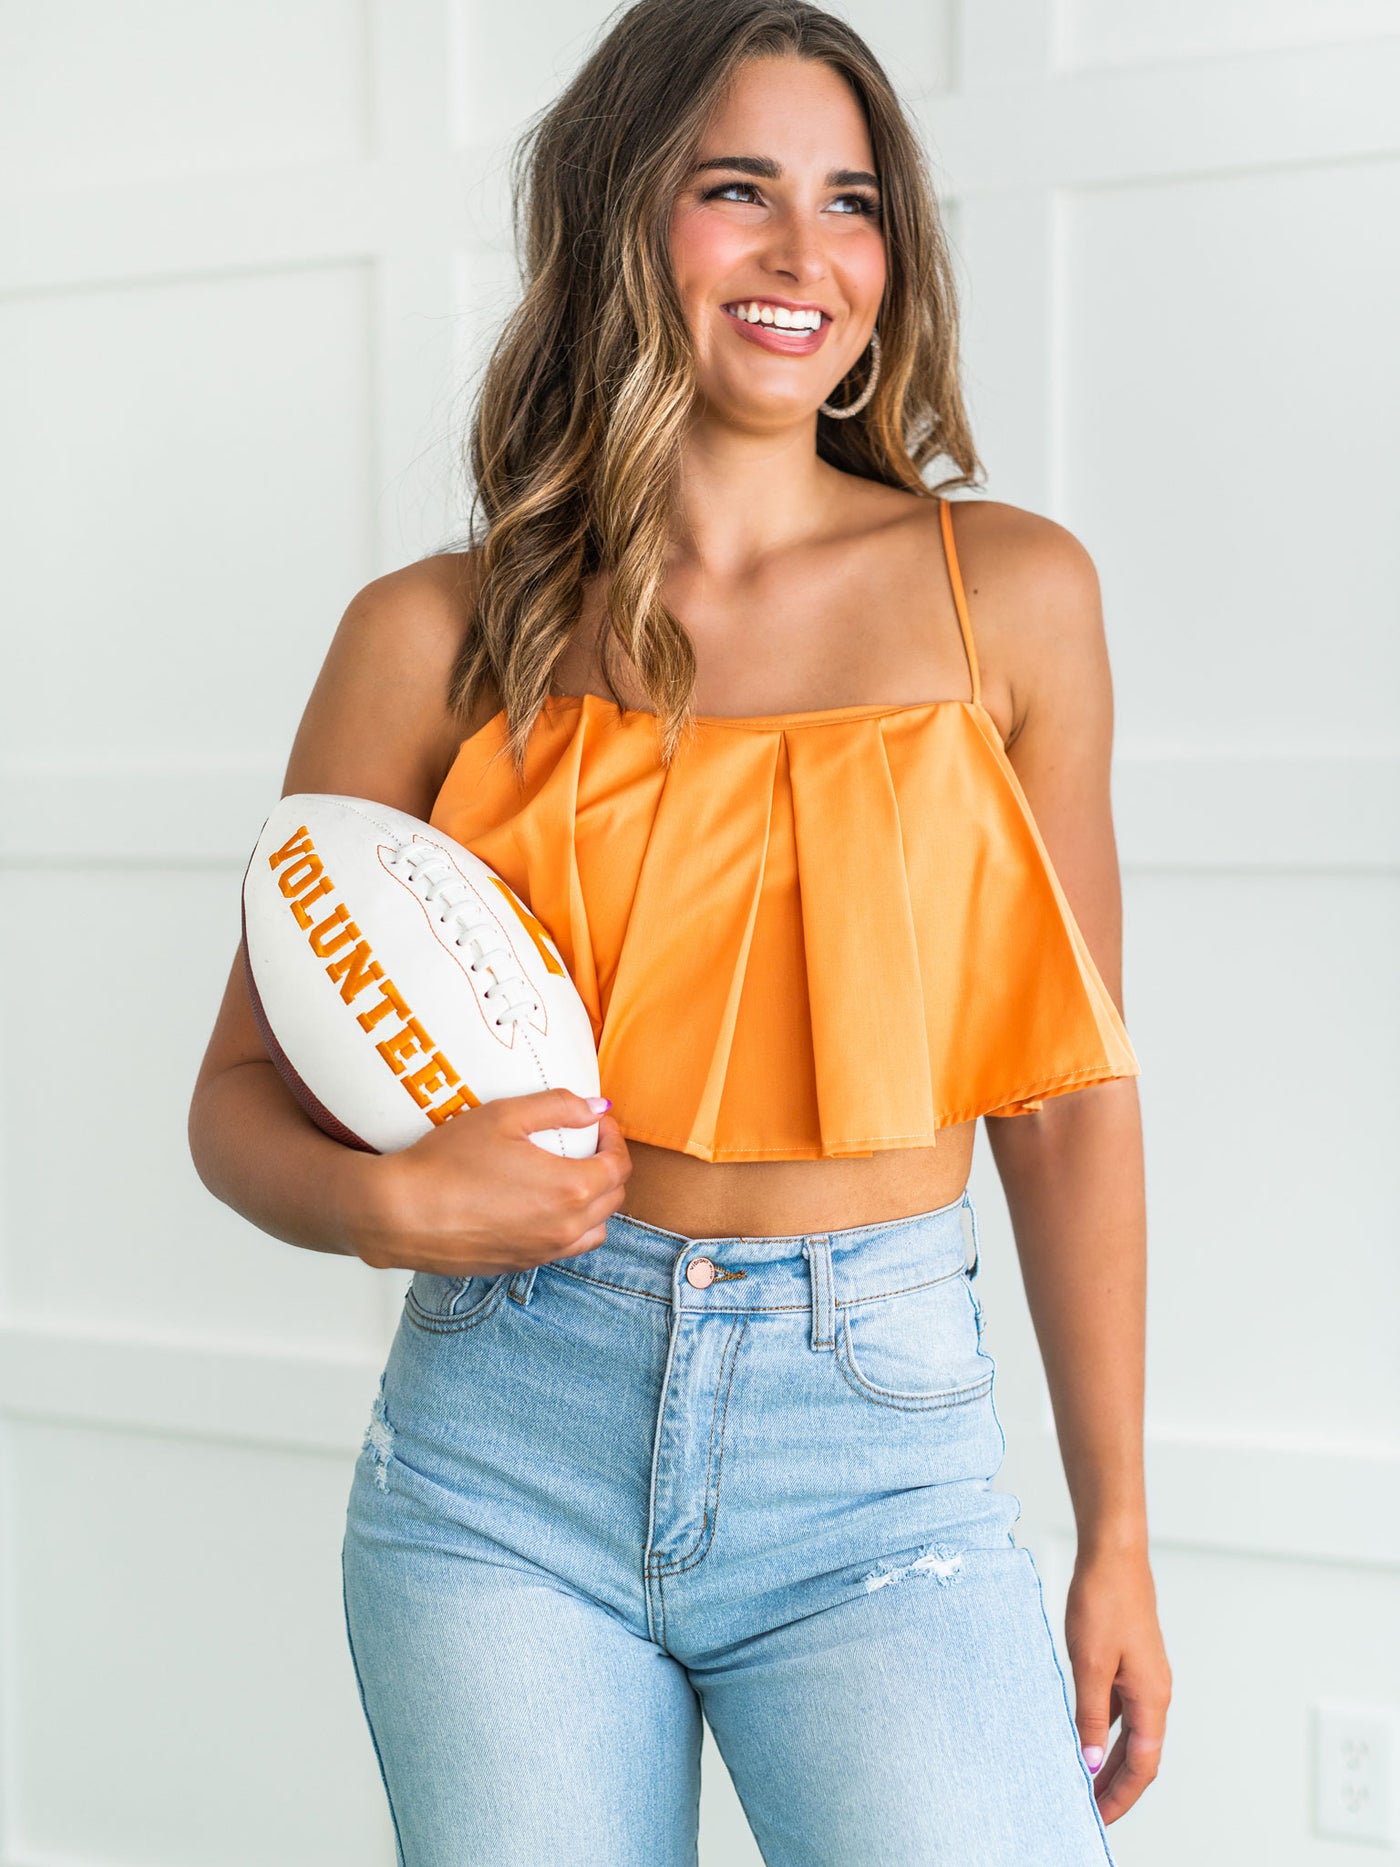 Champions Play Here Crop Top